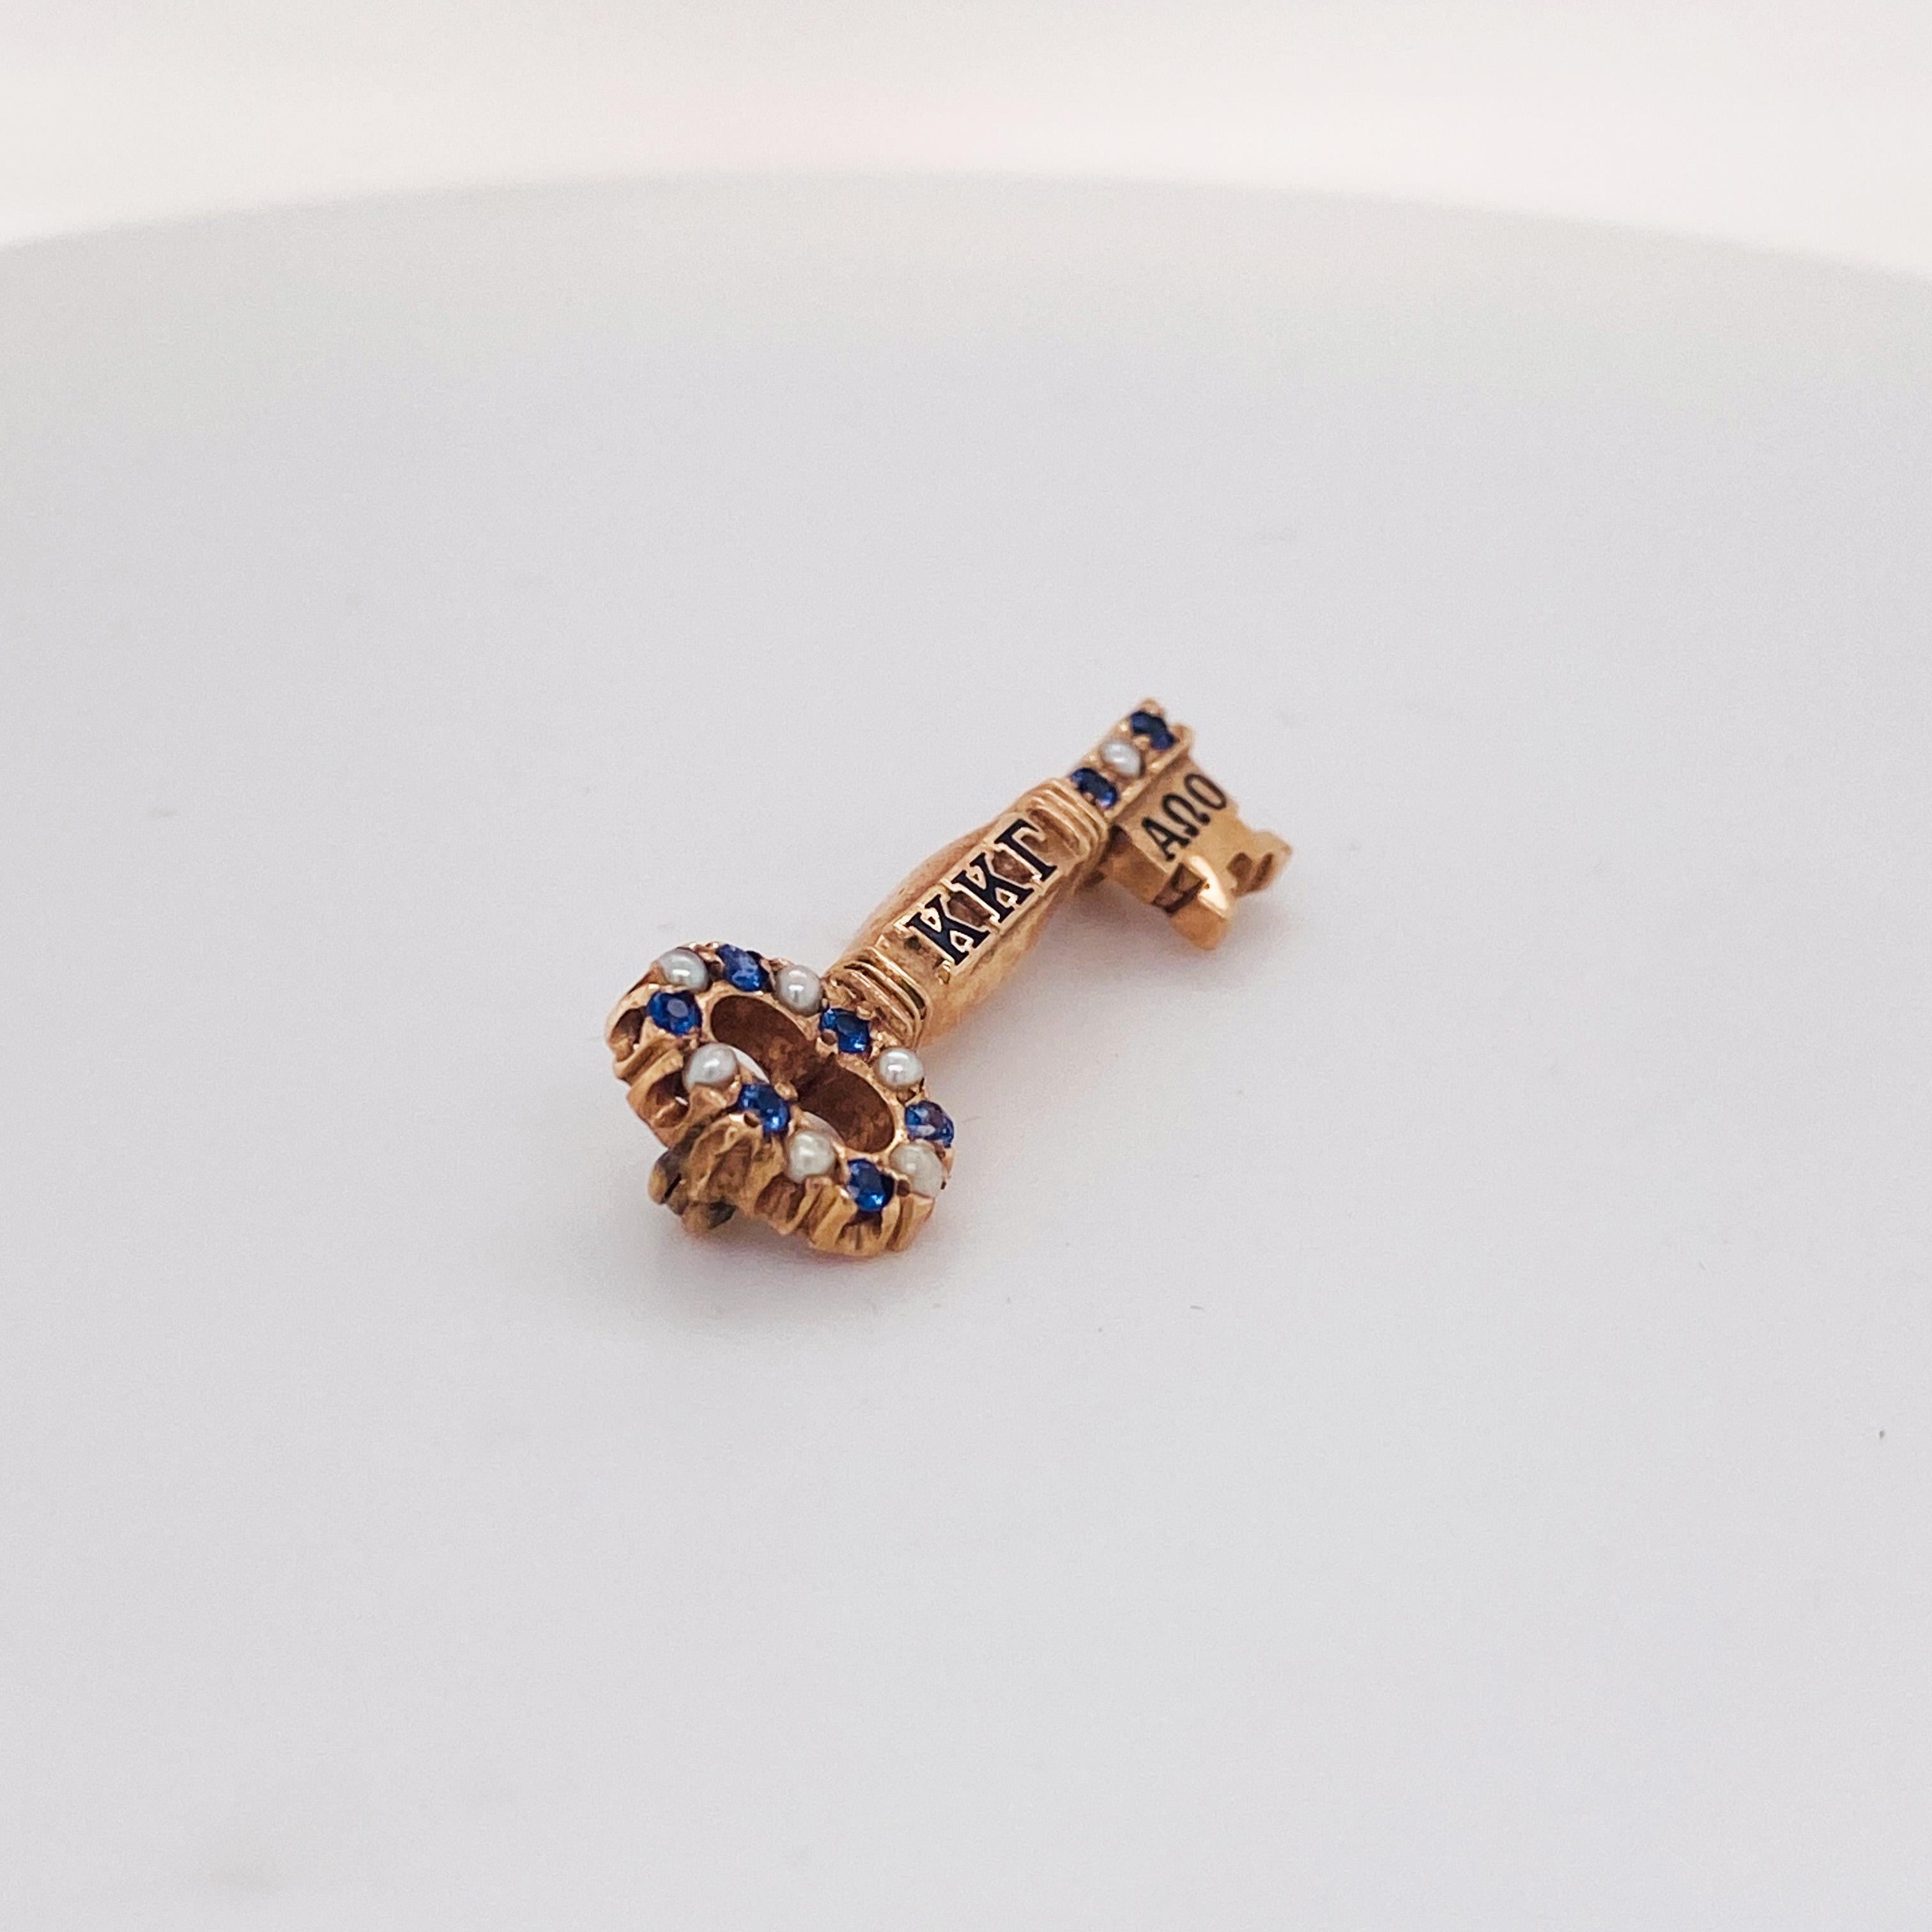 This pin is an estate piece with a beautiful history. The pin represents the Kappa Kappa Gamma sorority, originally founded in 1870. The Kappa Kappa Gamma sorority is still very active today with 139 collegiate chapters. This is a itty bitty pin and